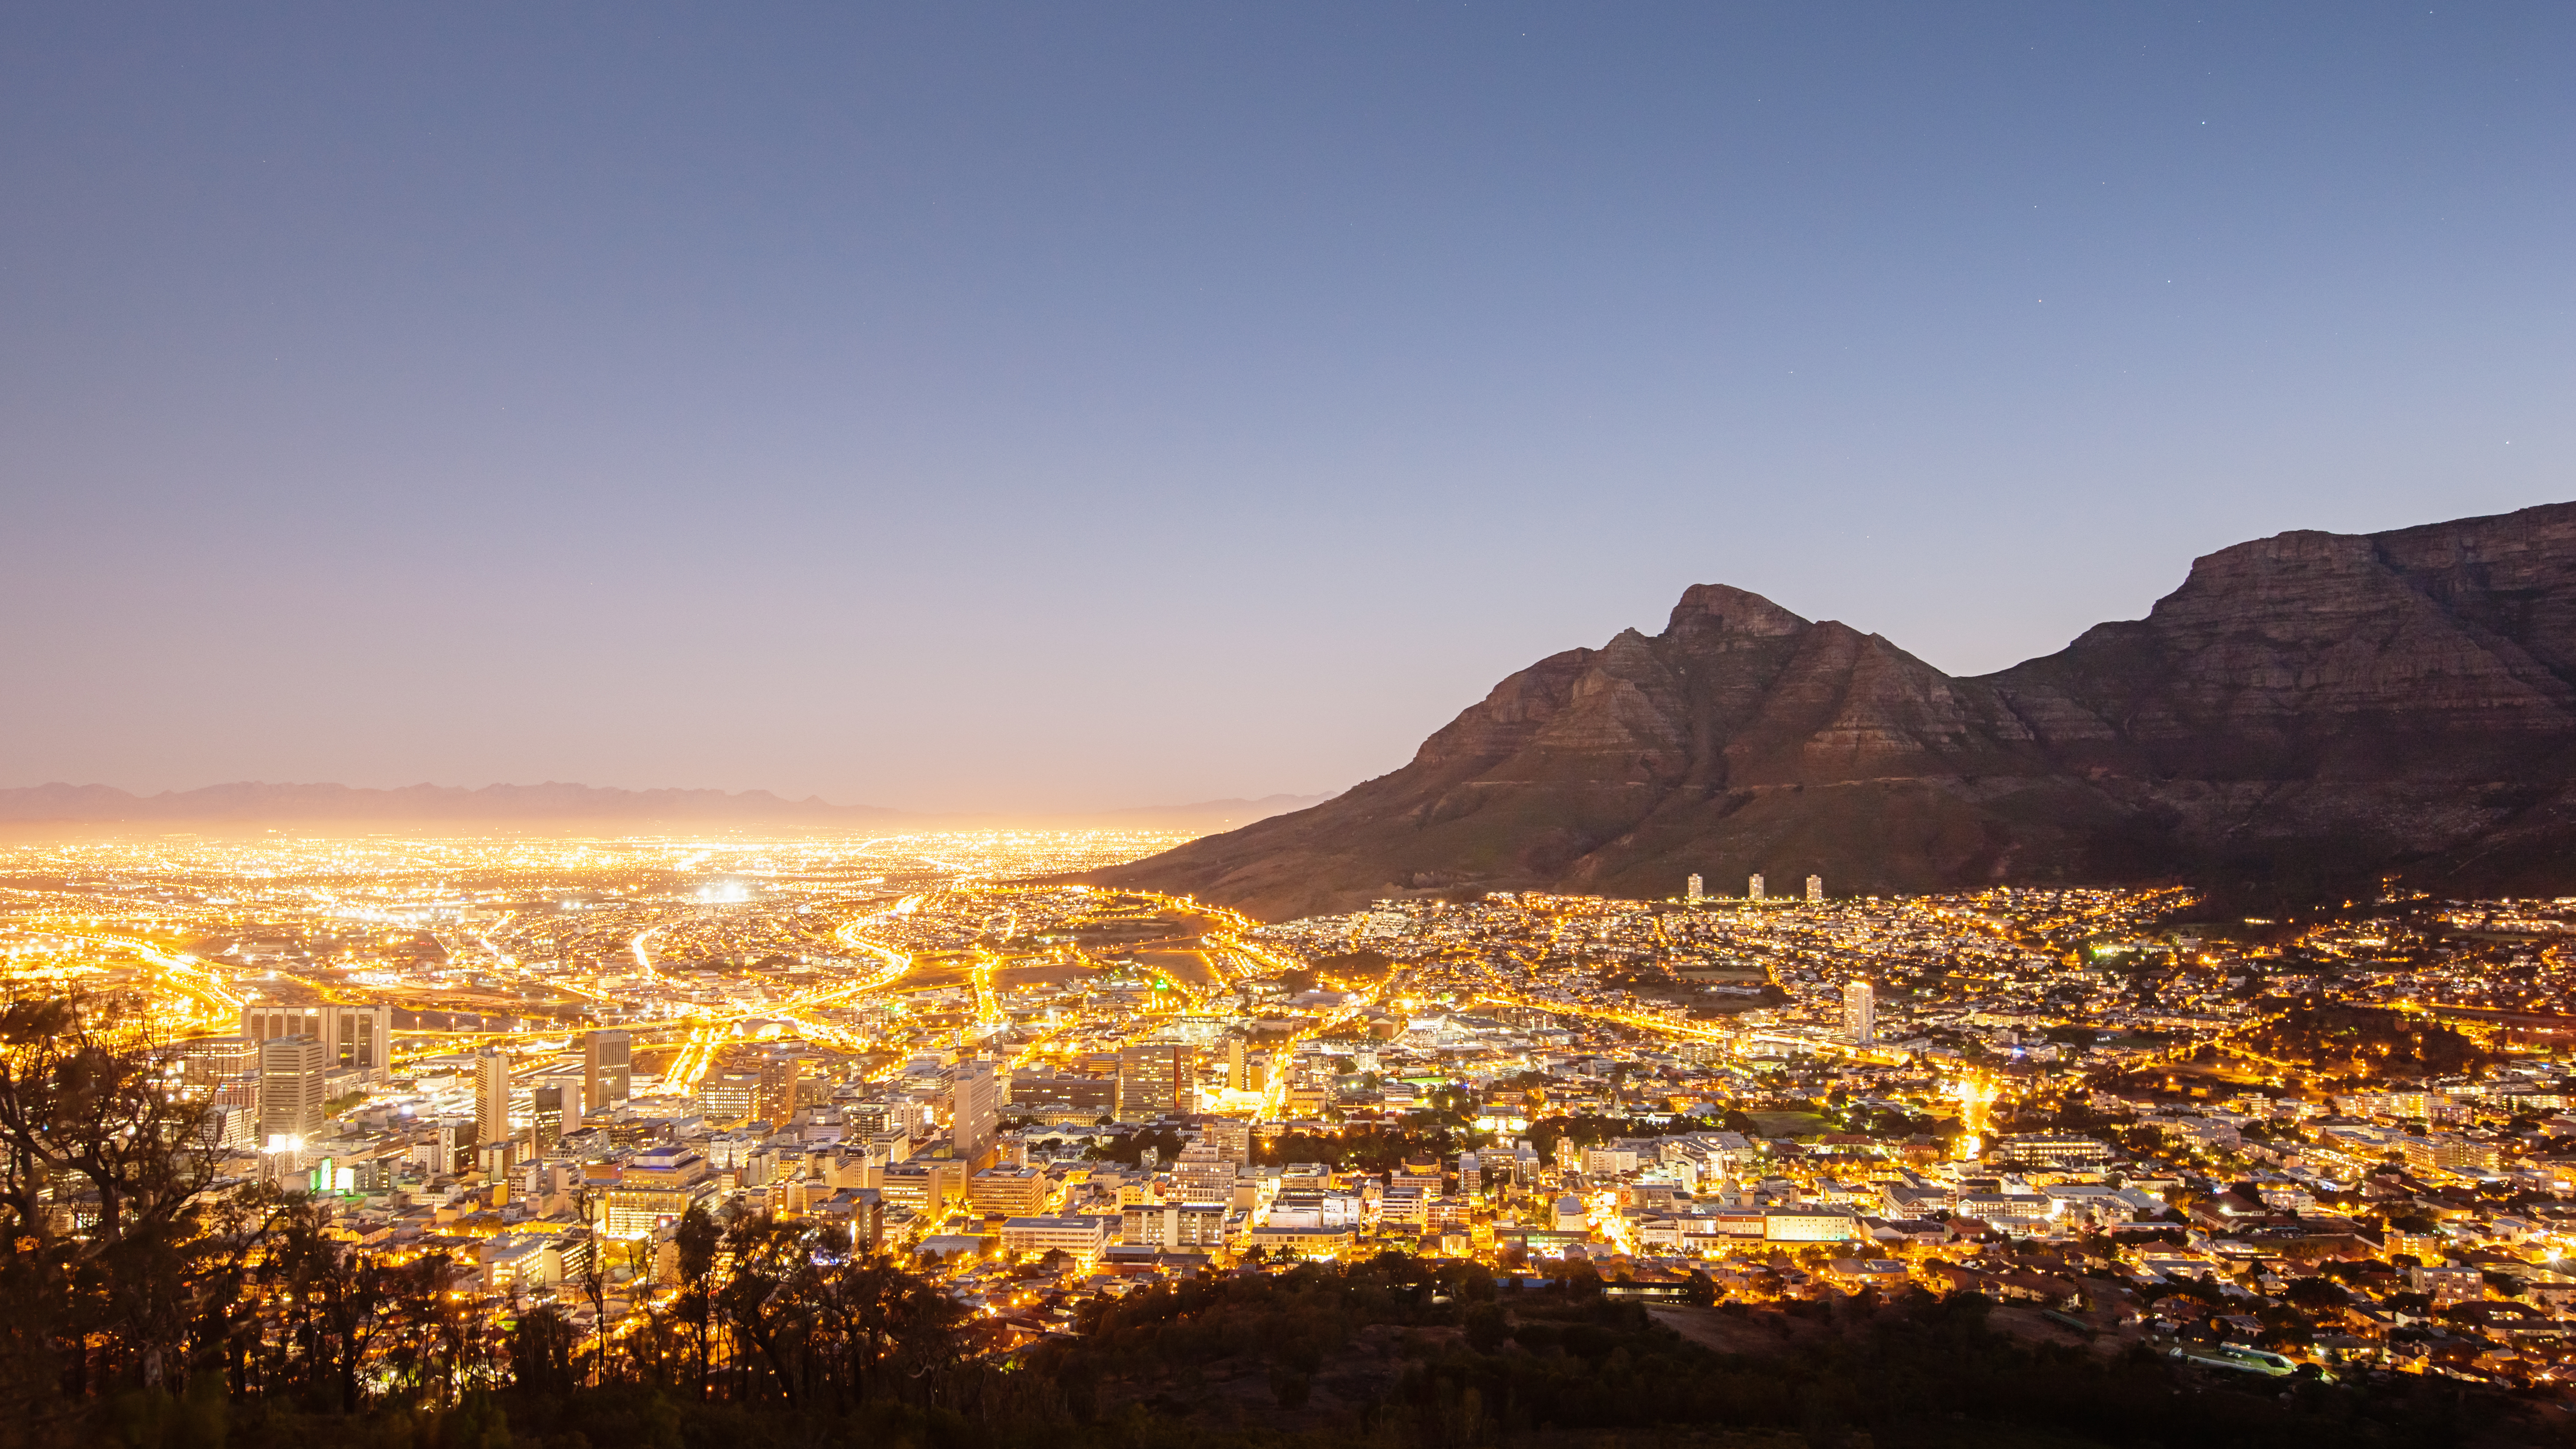 Panorama view over illuminated Cape Town Cityscape at the foot of famous Table Mountain under clear sky. Cape Town, South Africa.